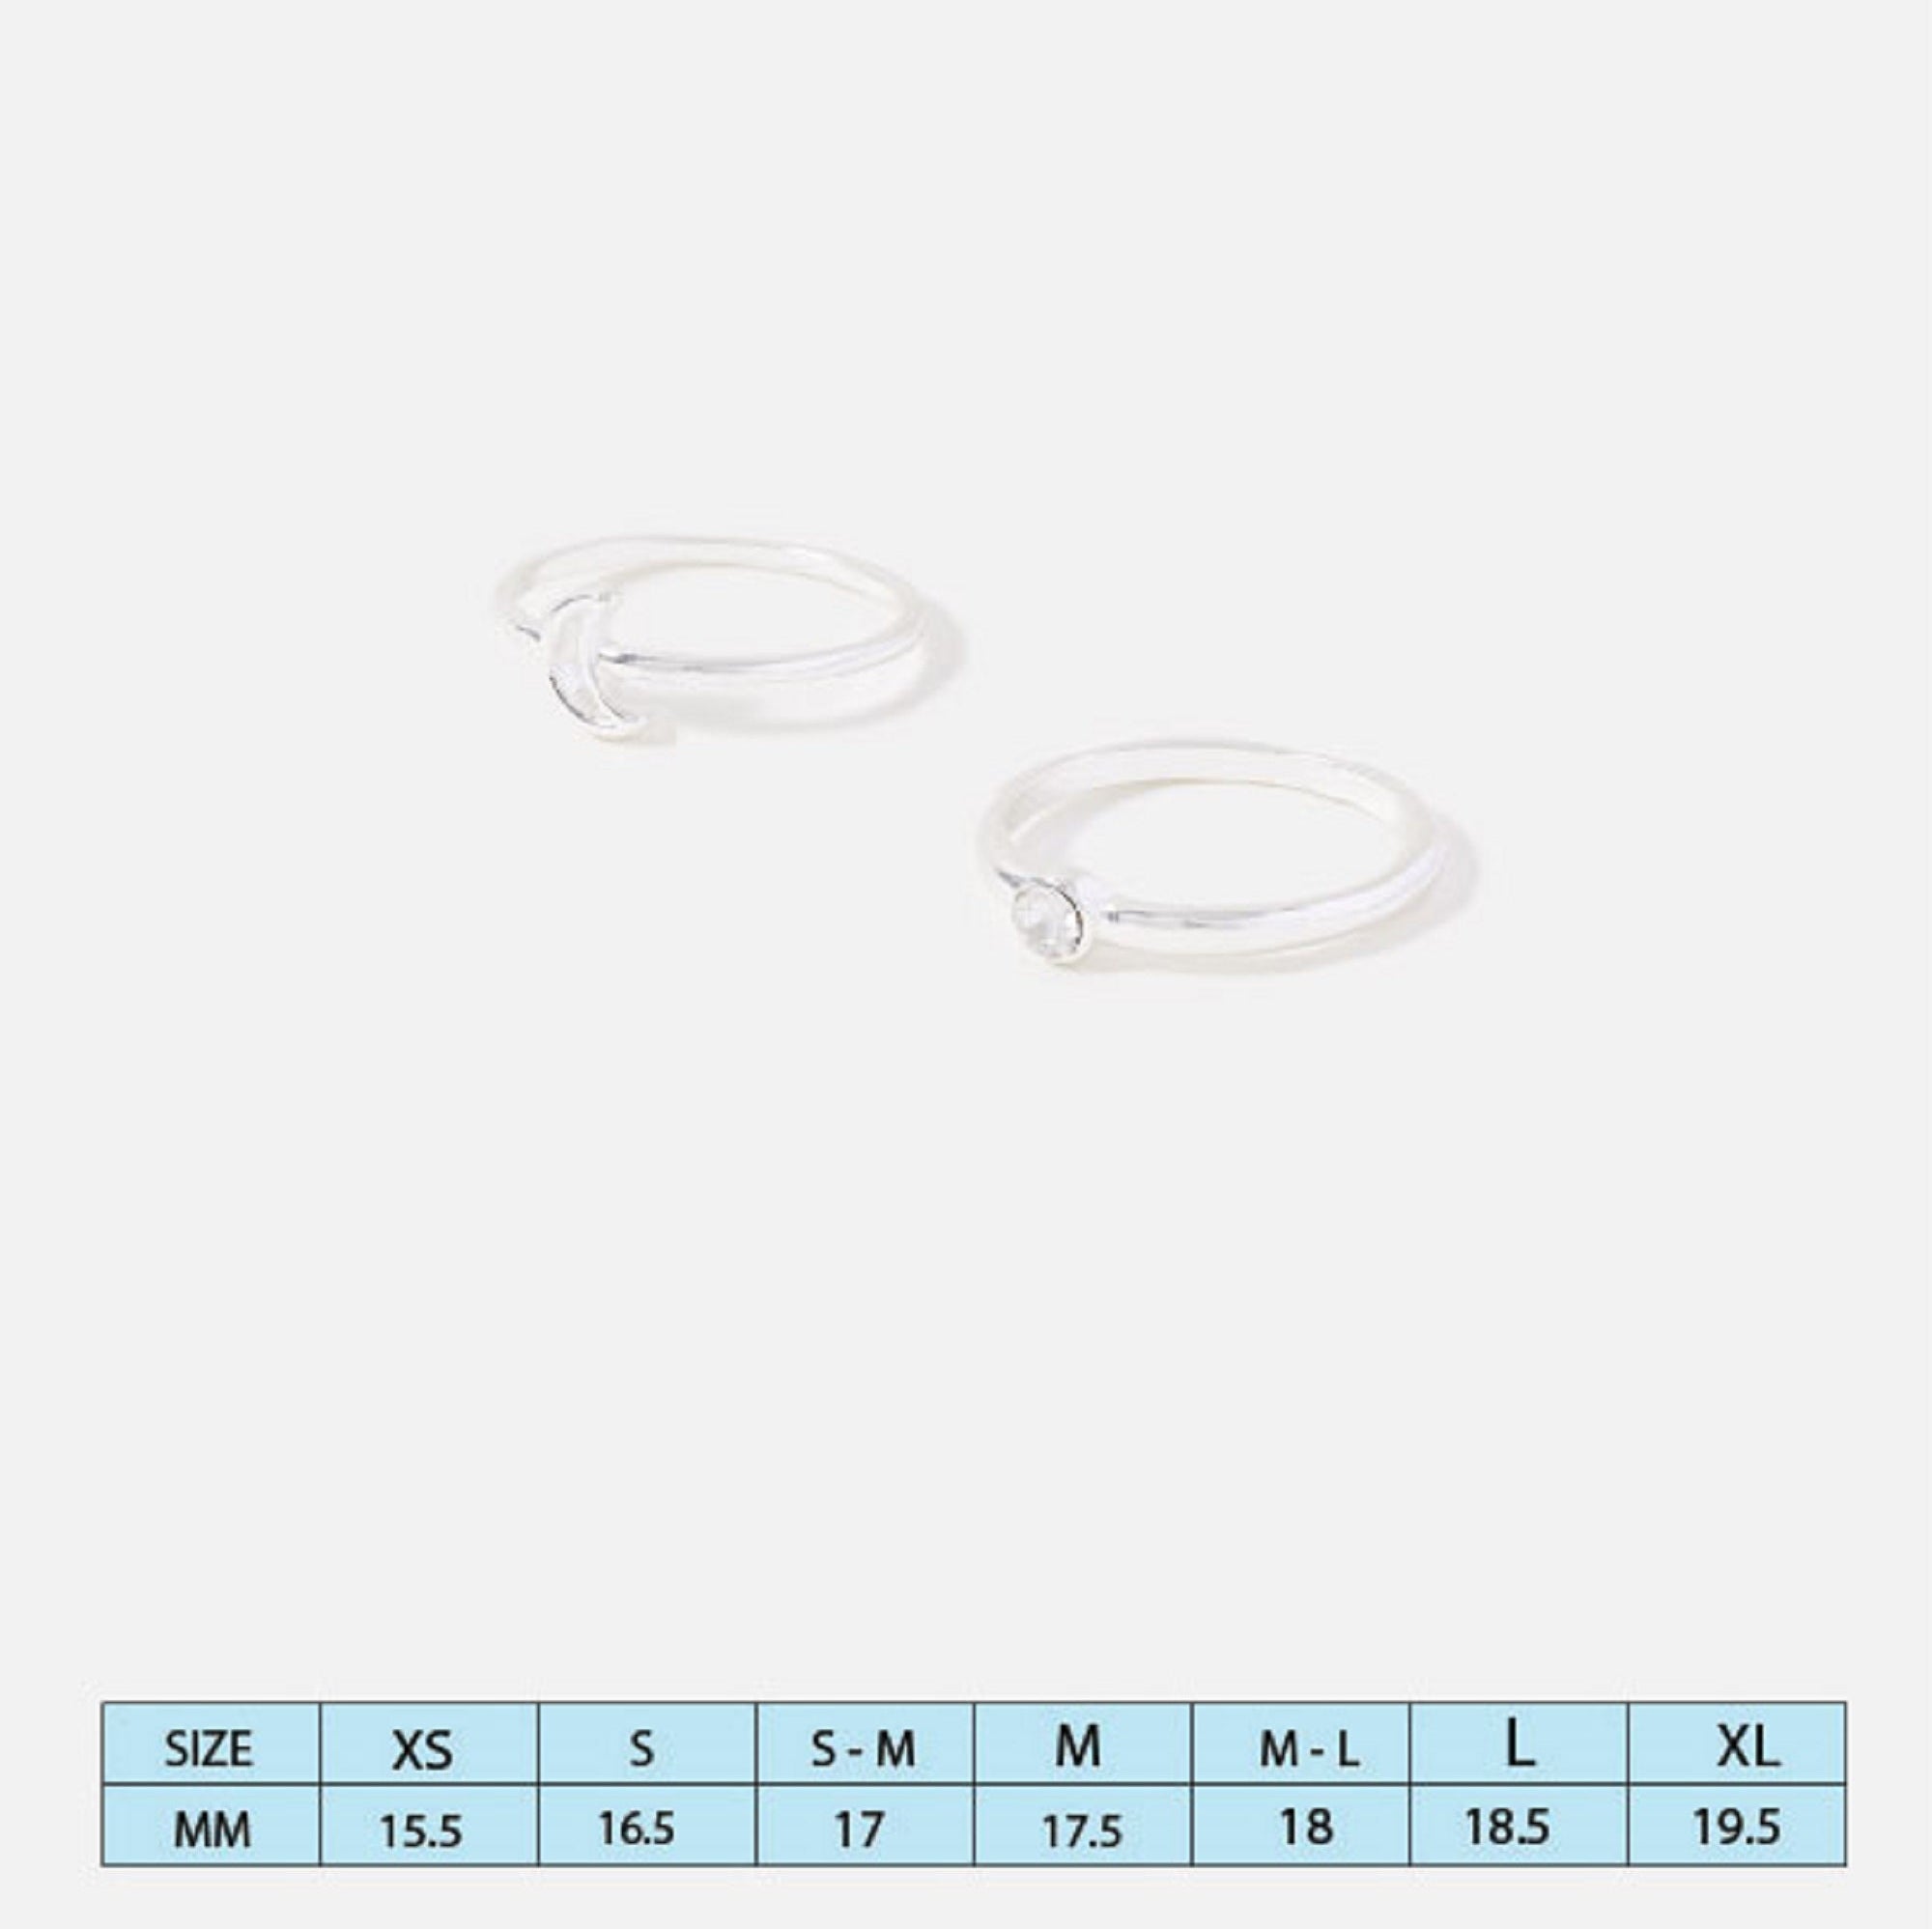 Accessorize London Women's Silver Pack of 2 Moon Crystal Stacking Rings-Medium